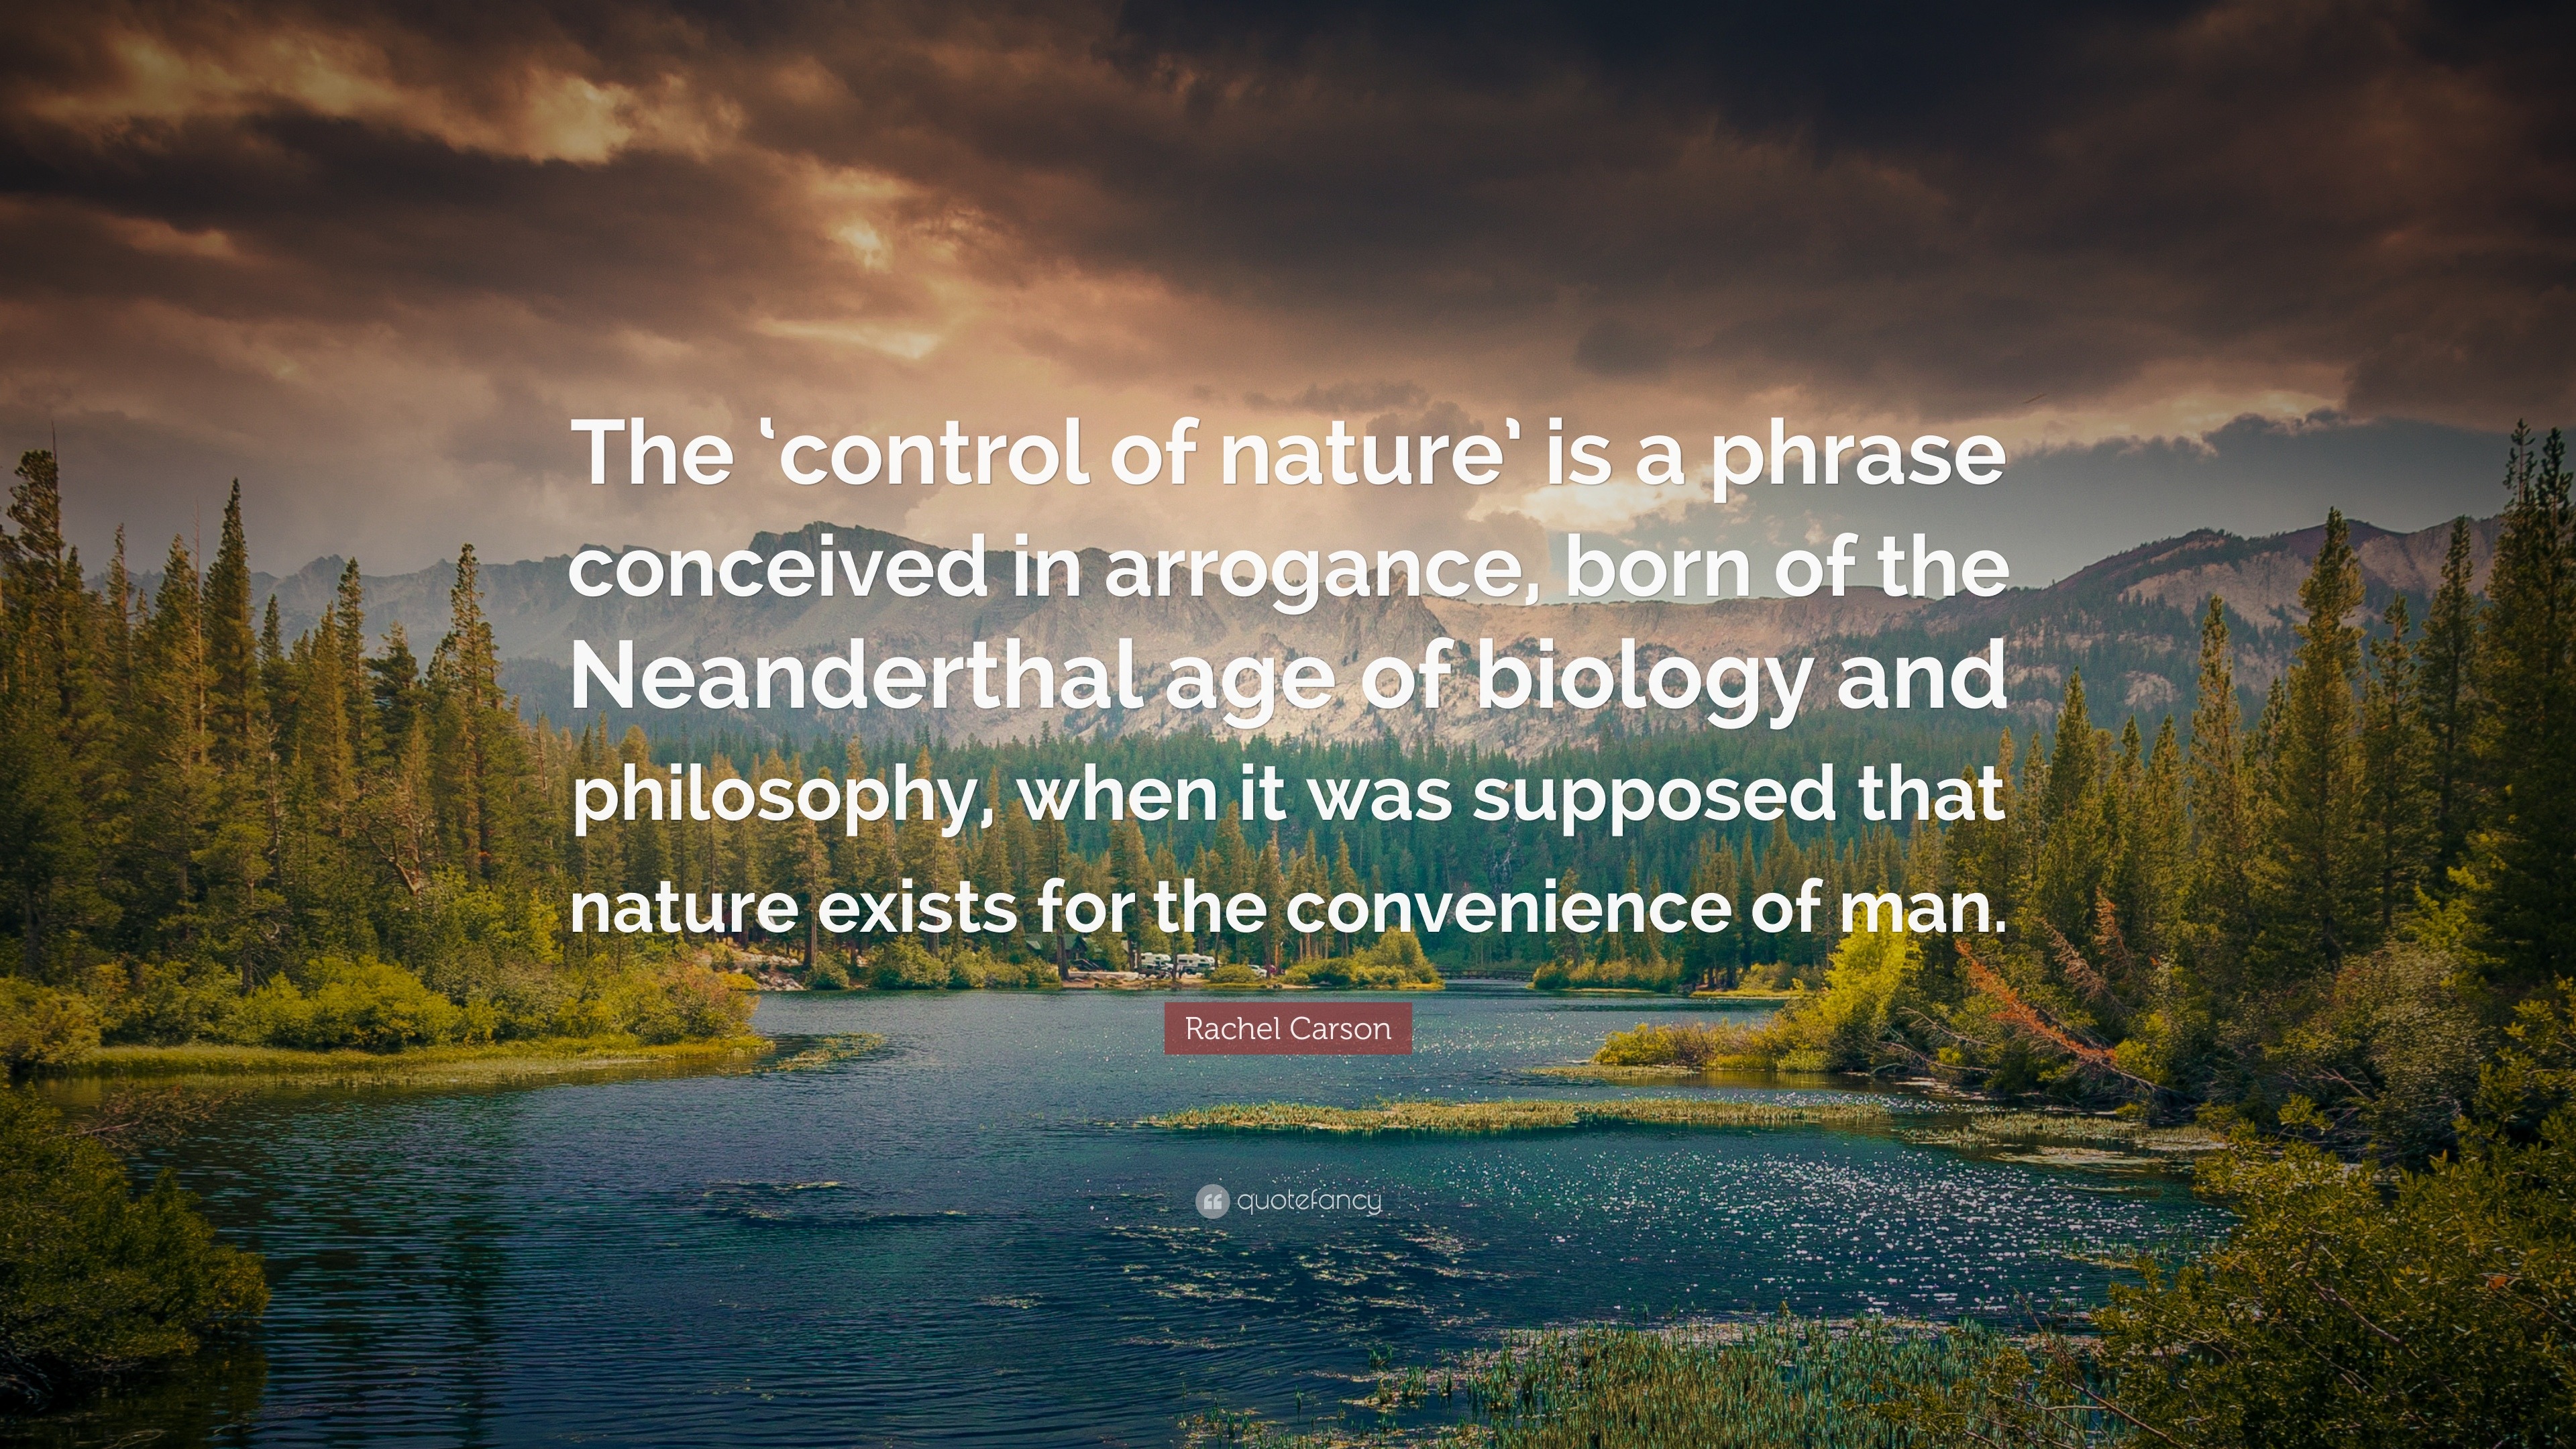 Rachel Carson Quote: “The ‘control of nature’ is a phrase conceived in